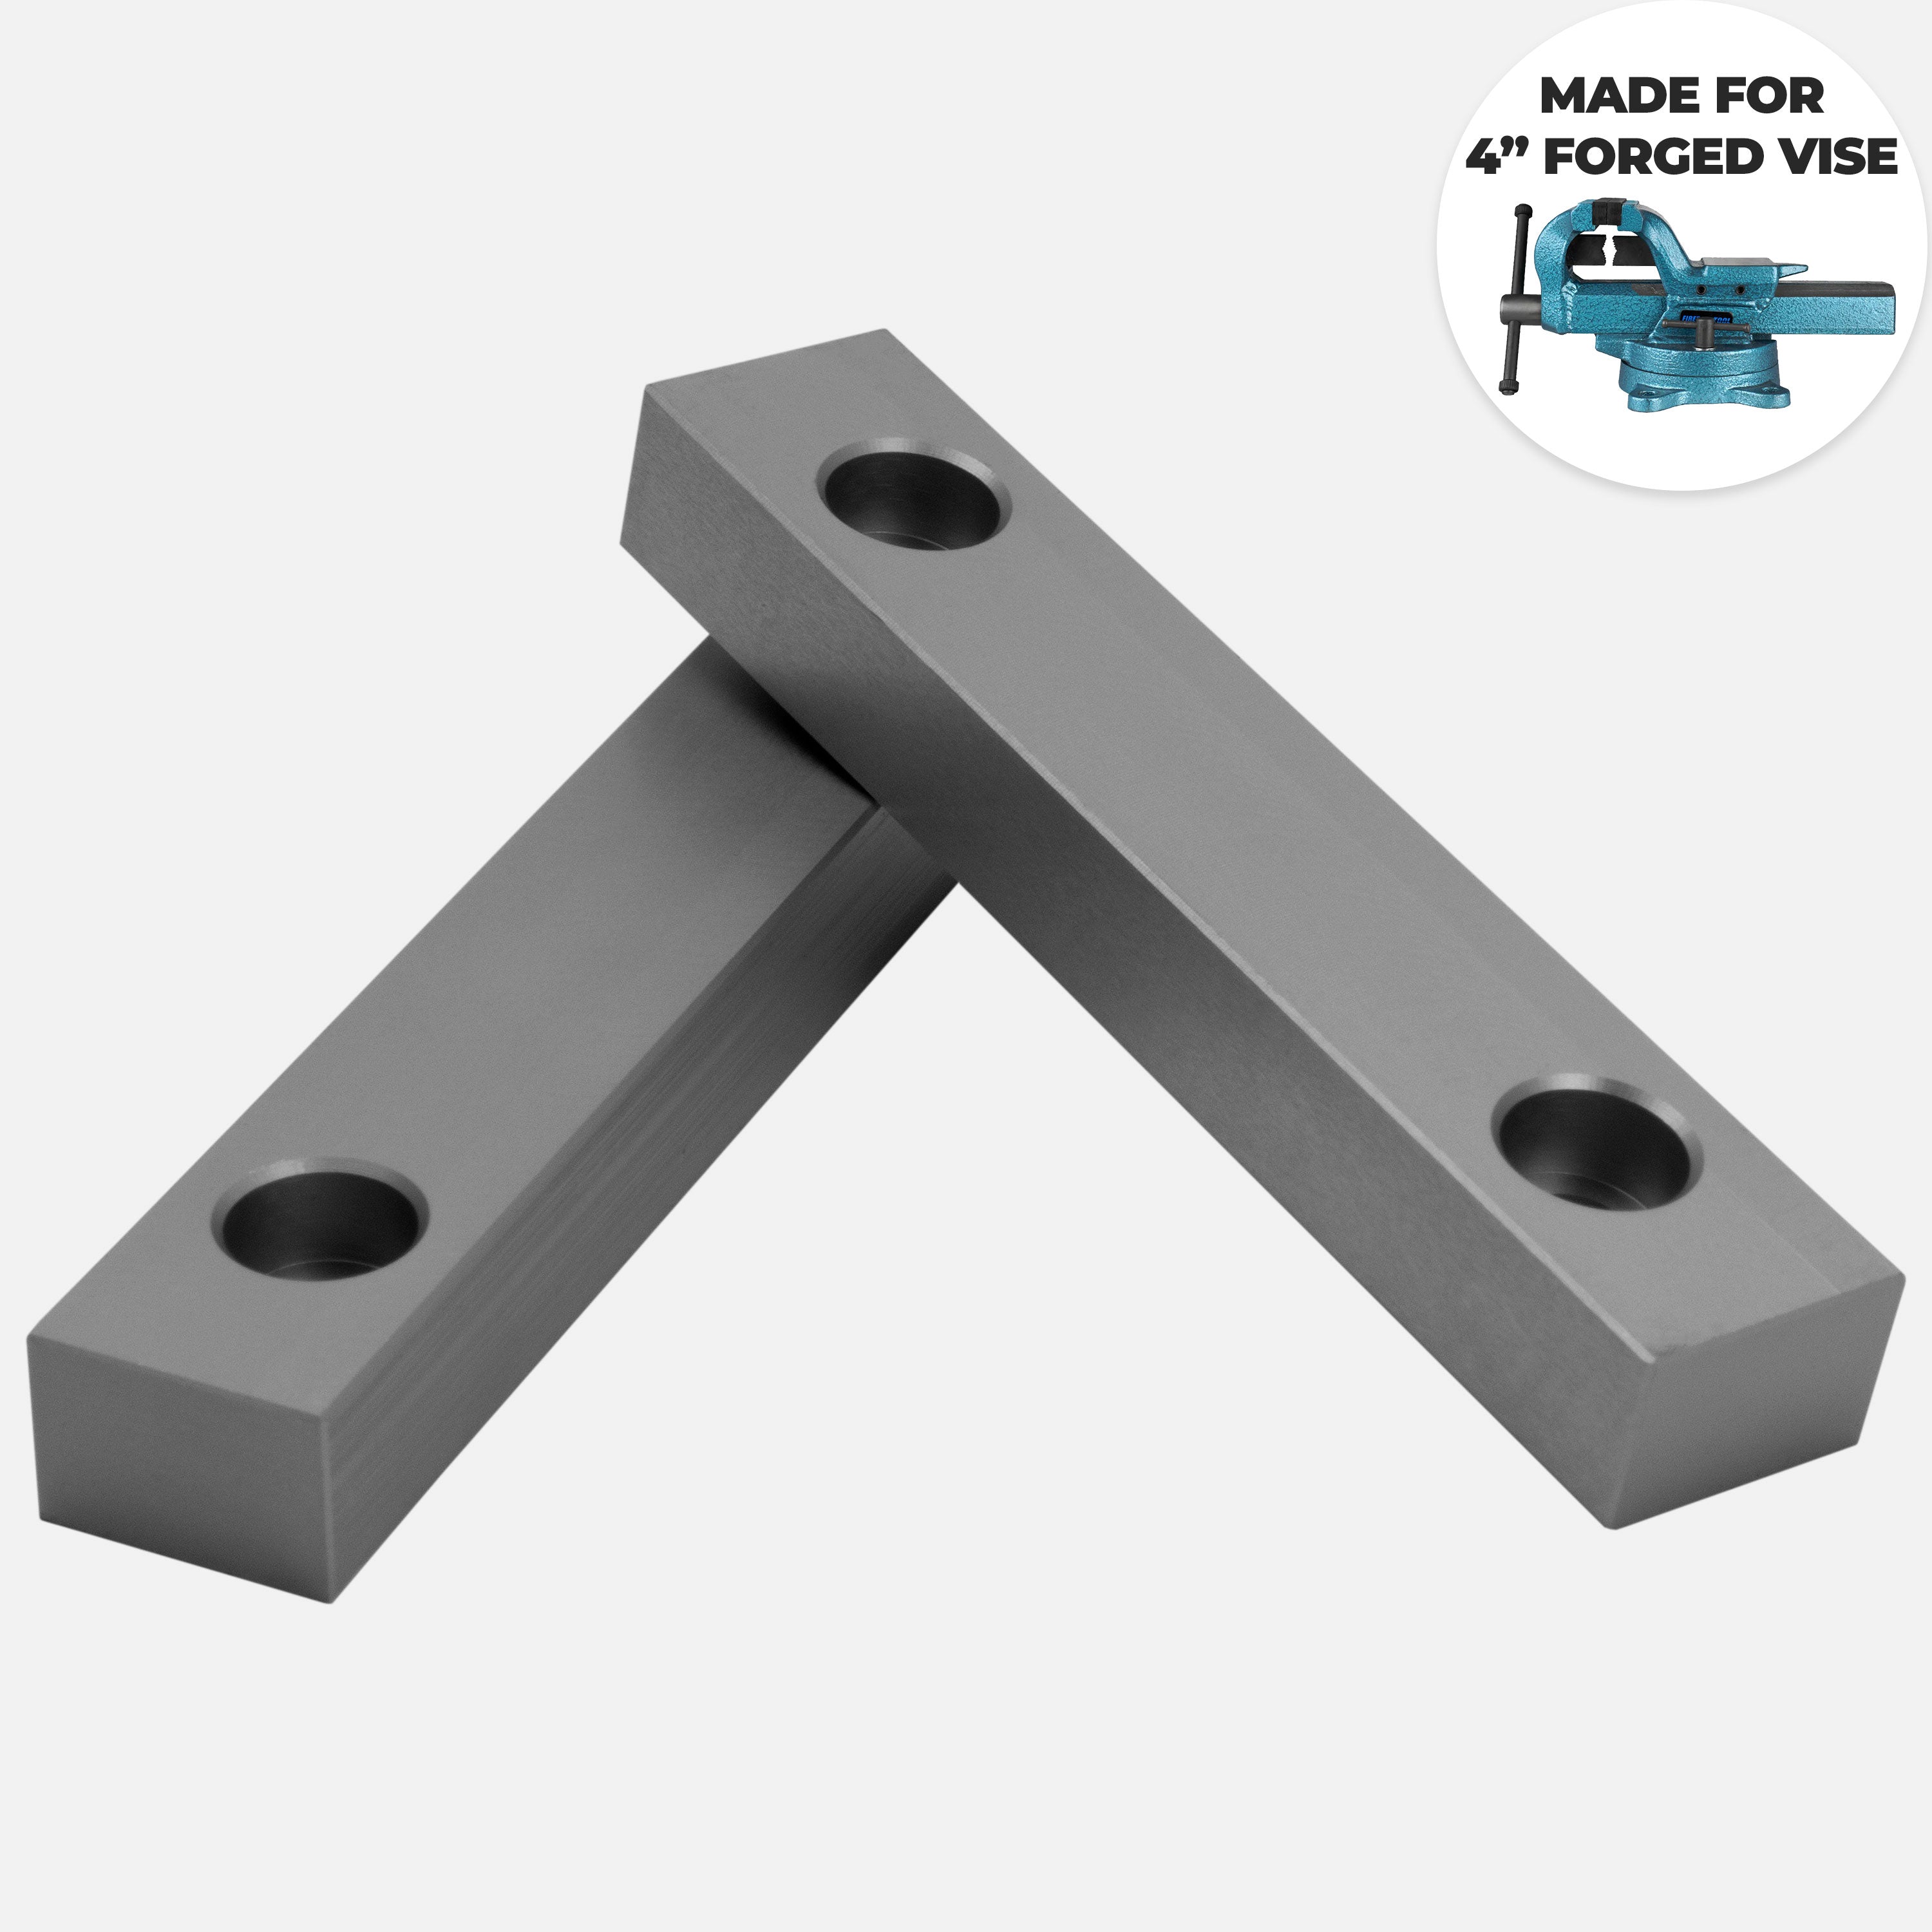 Aluminum Vise Jaws for Blue Forged Vise (Pair)